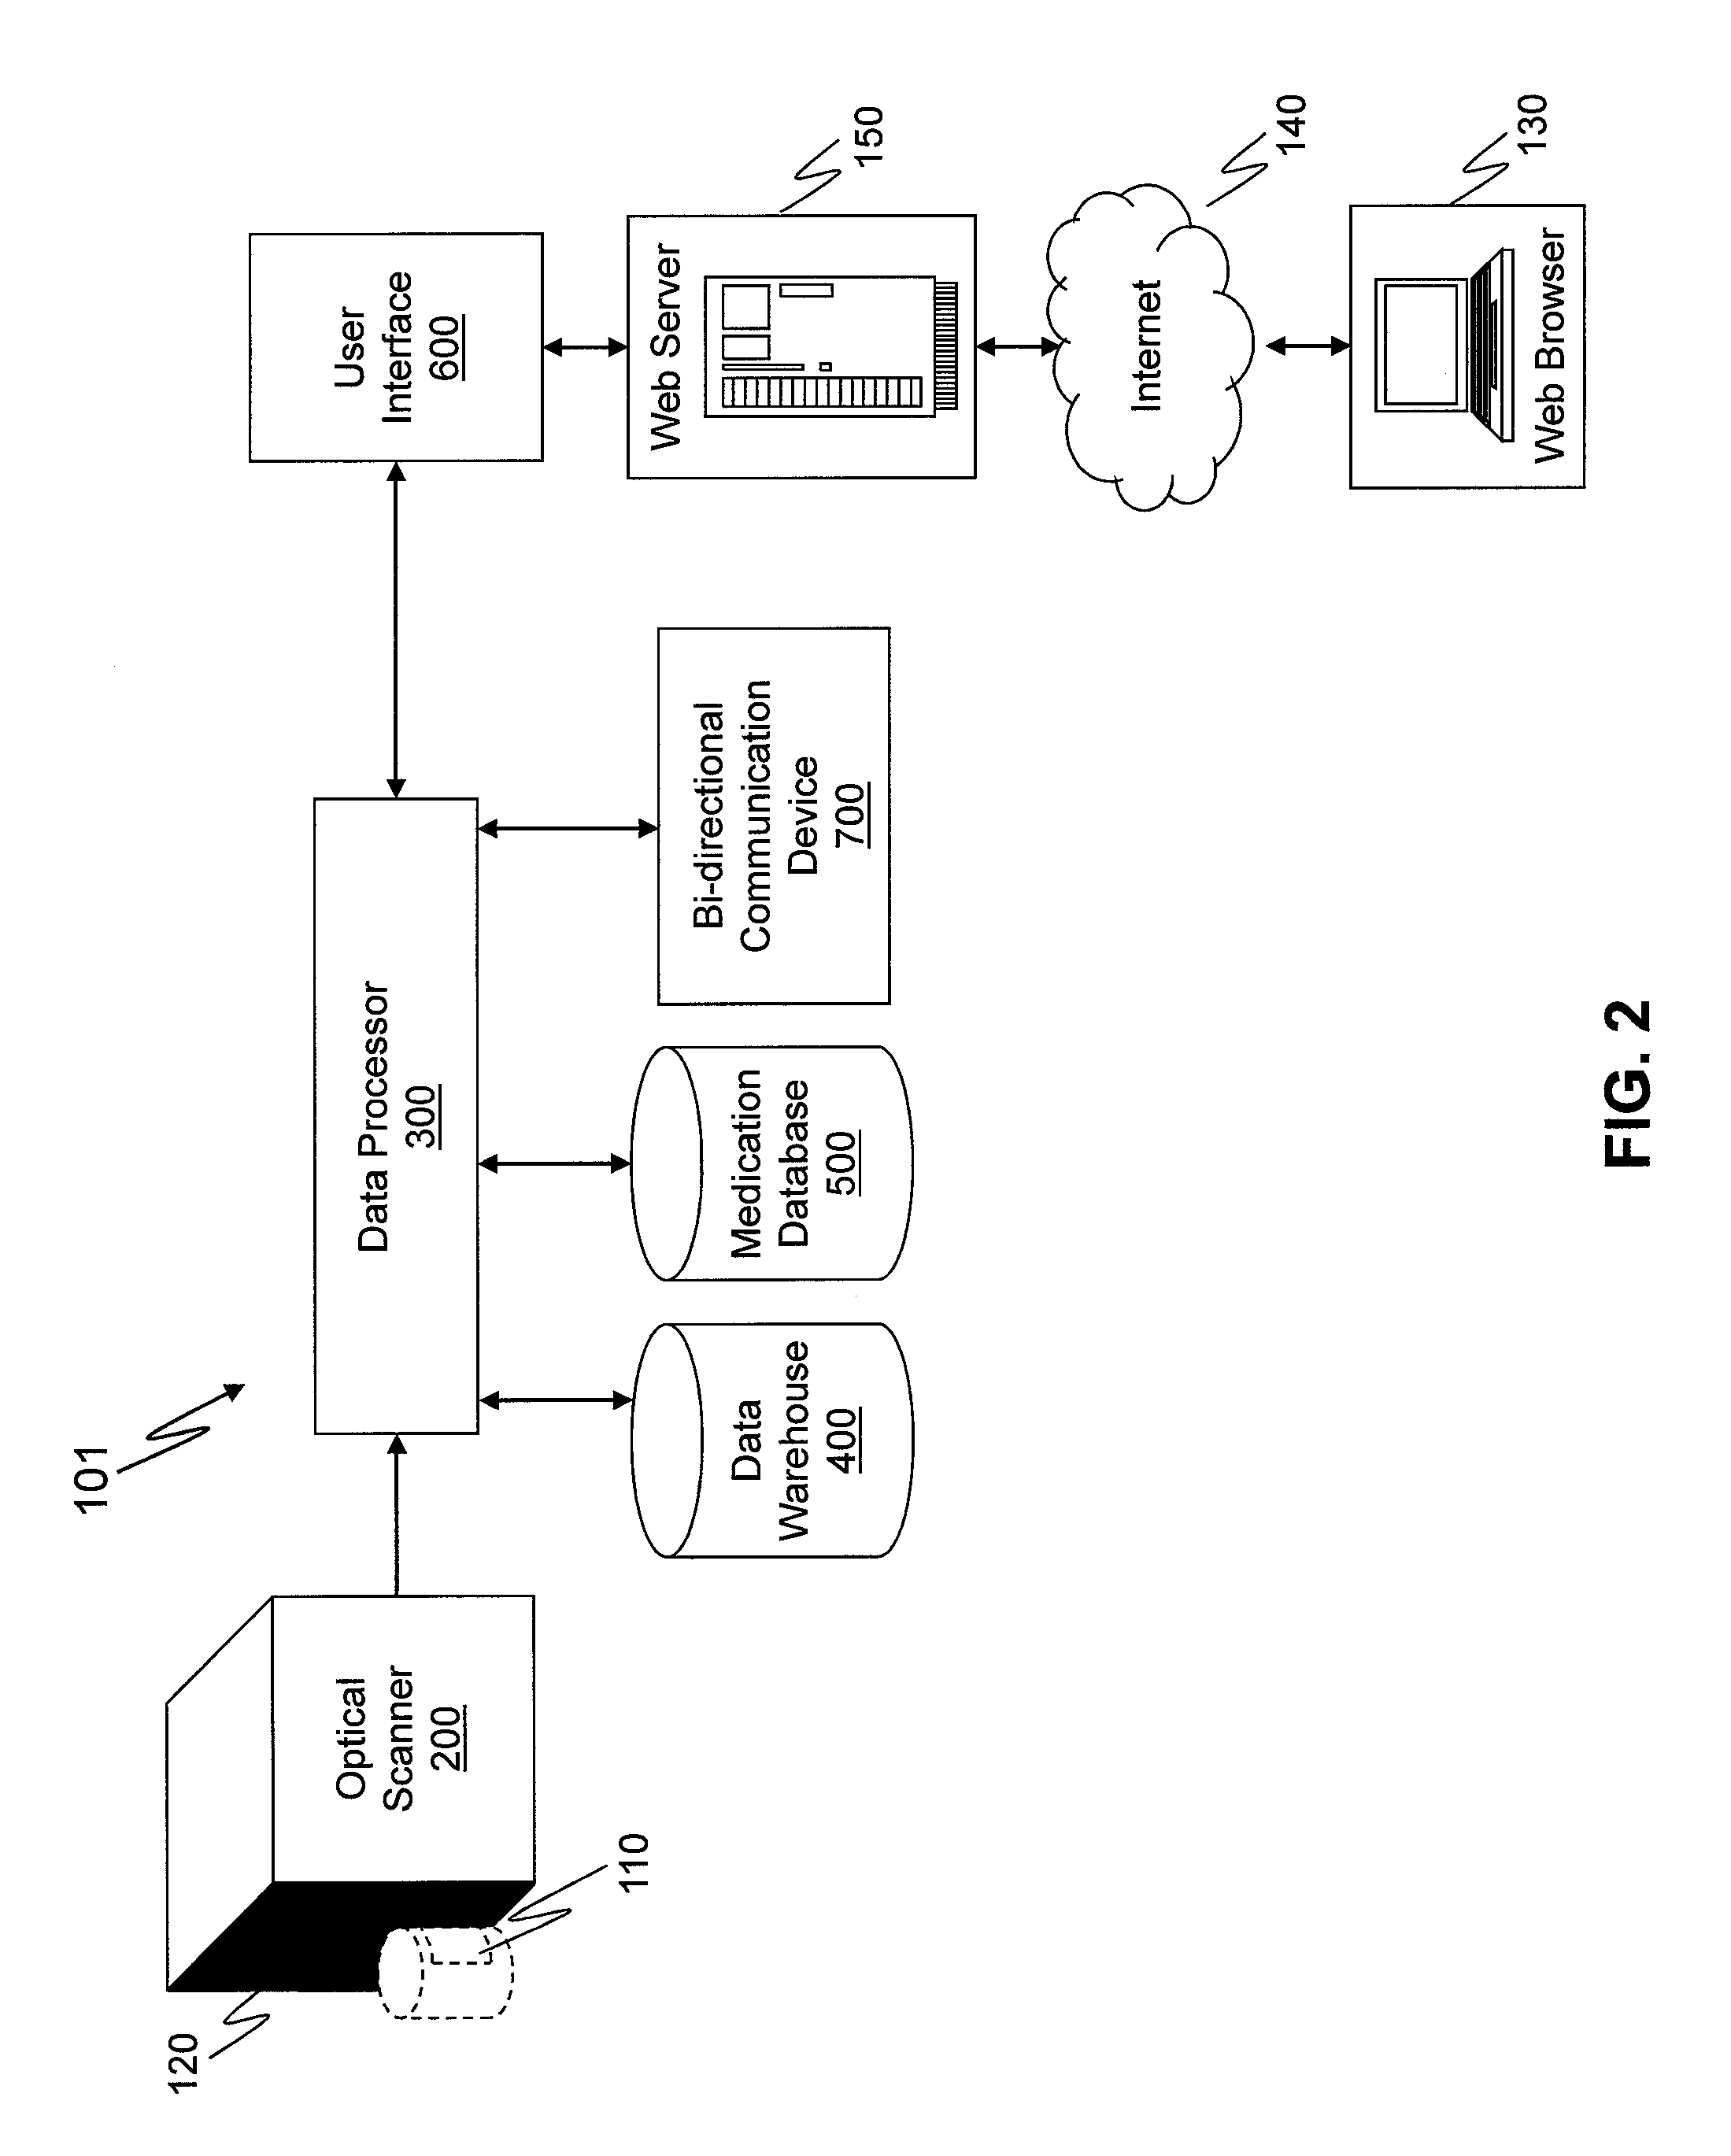 System and method for generating a medication inventory